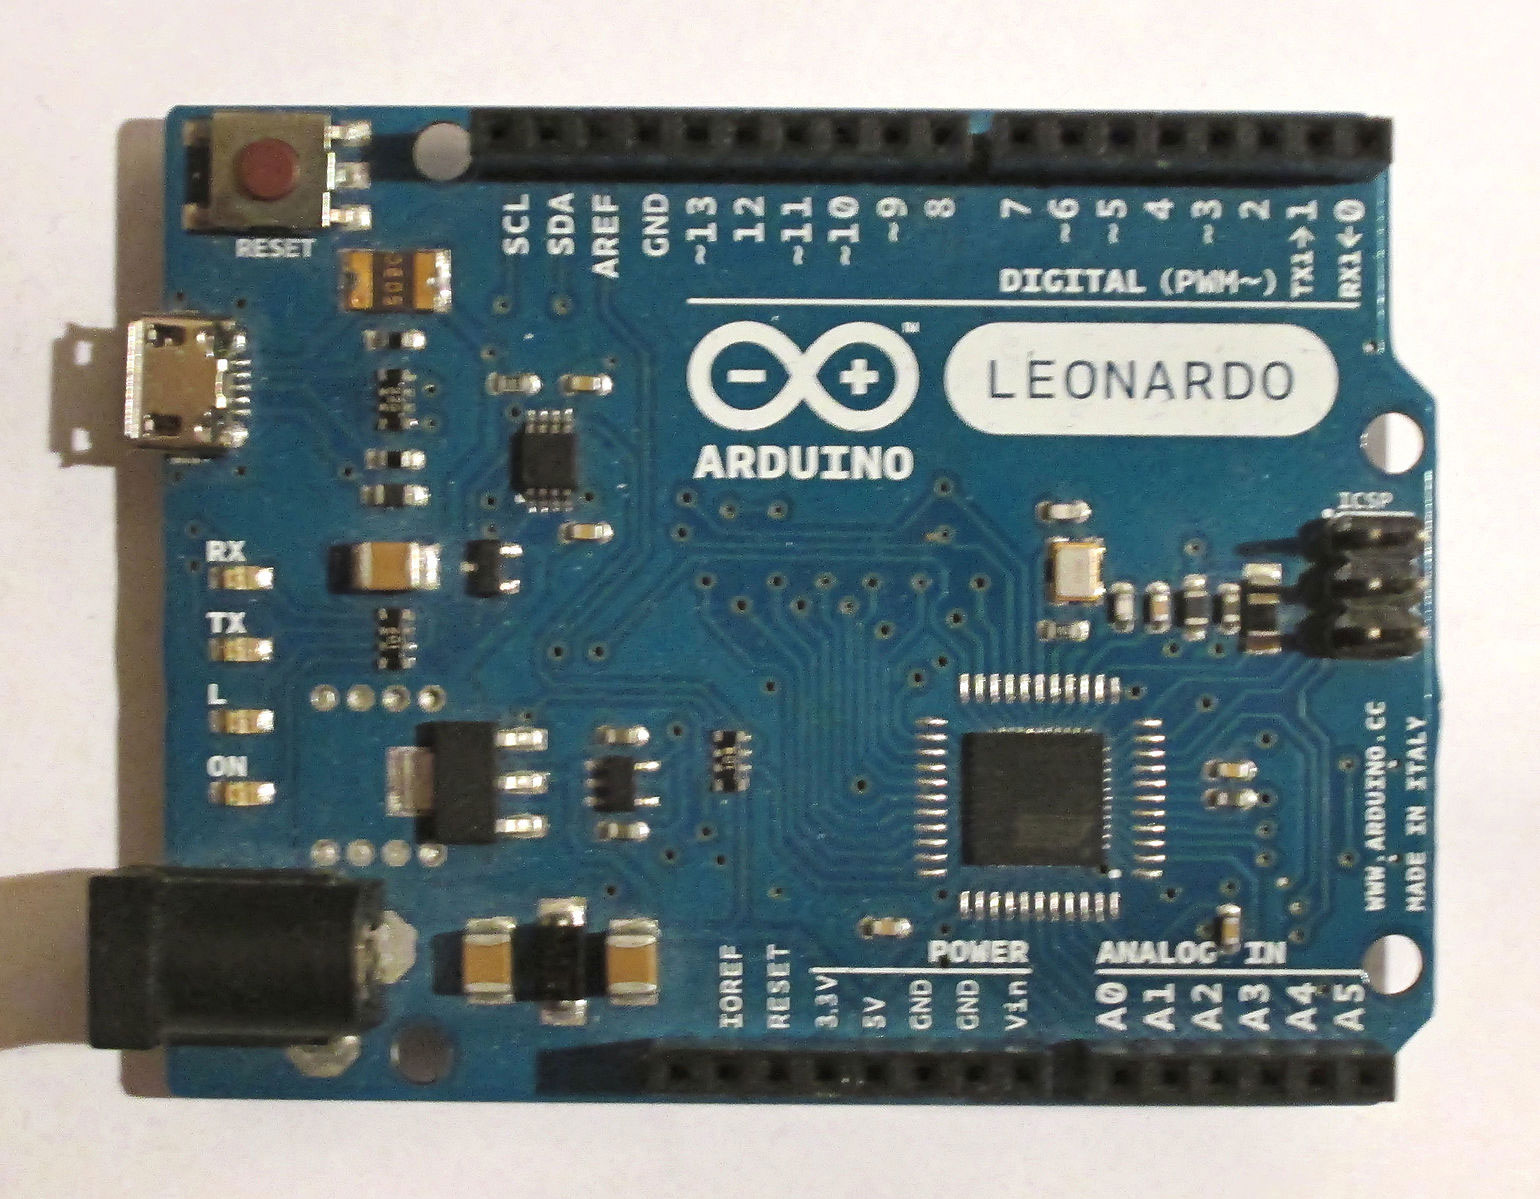 The Arduino Leonardo with the power jack and ICSP header attached. Note the pin numbers/labels